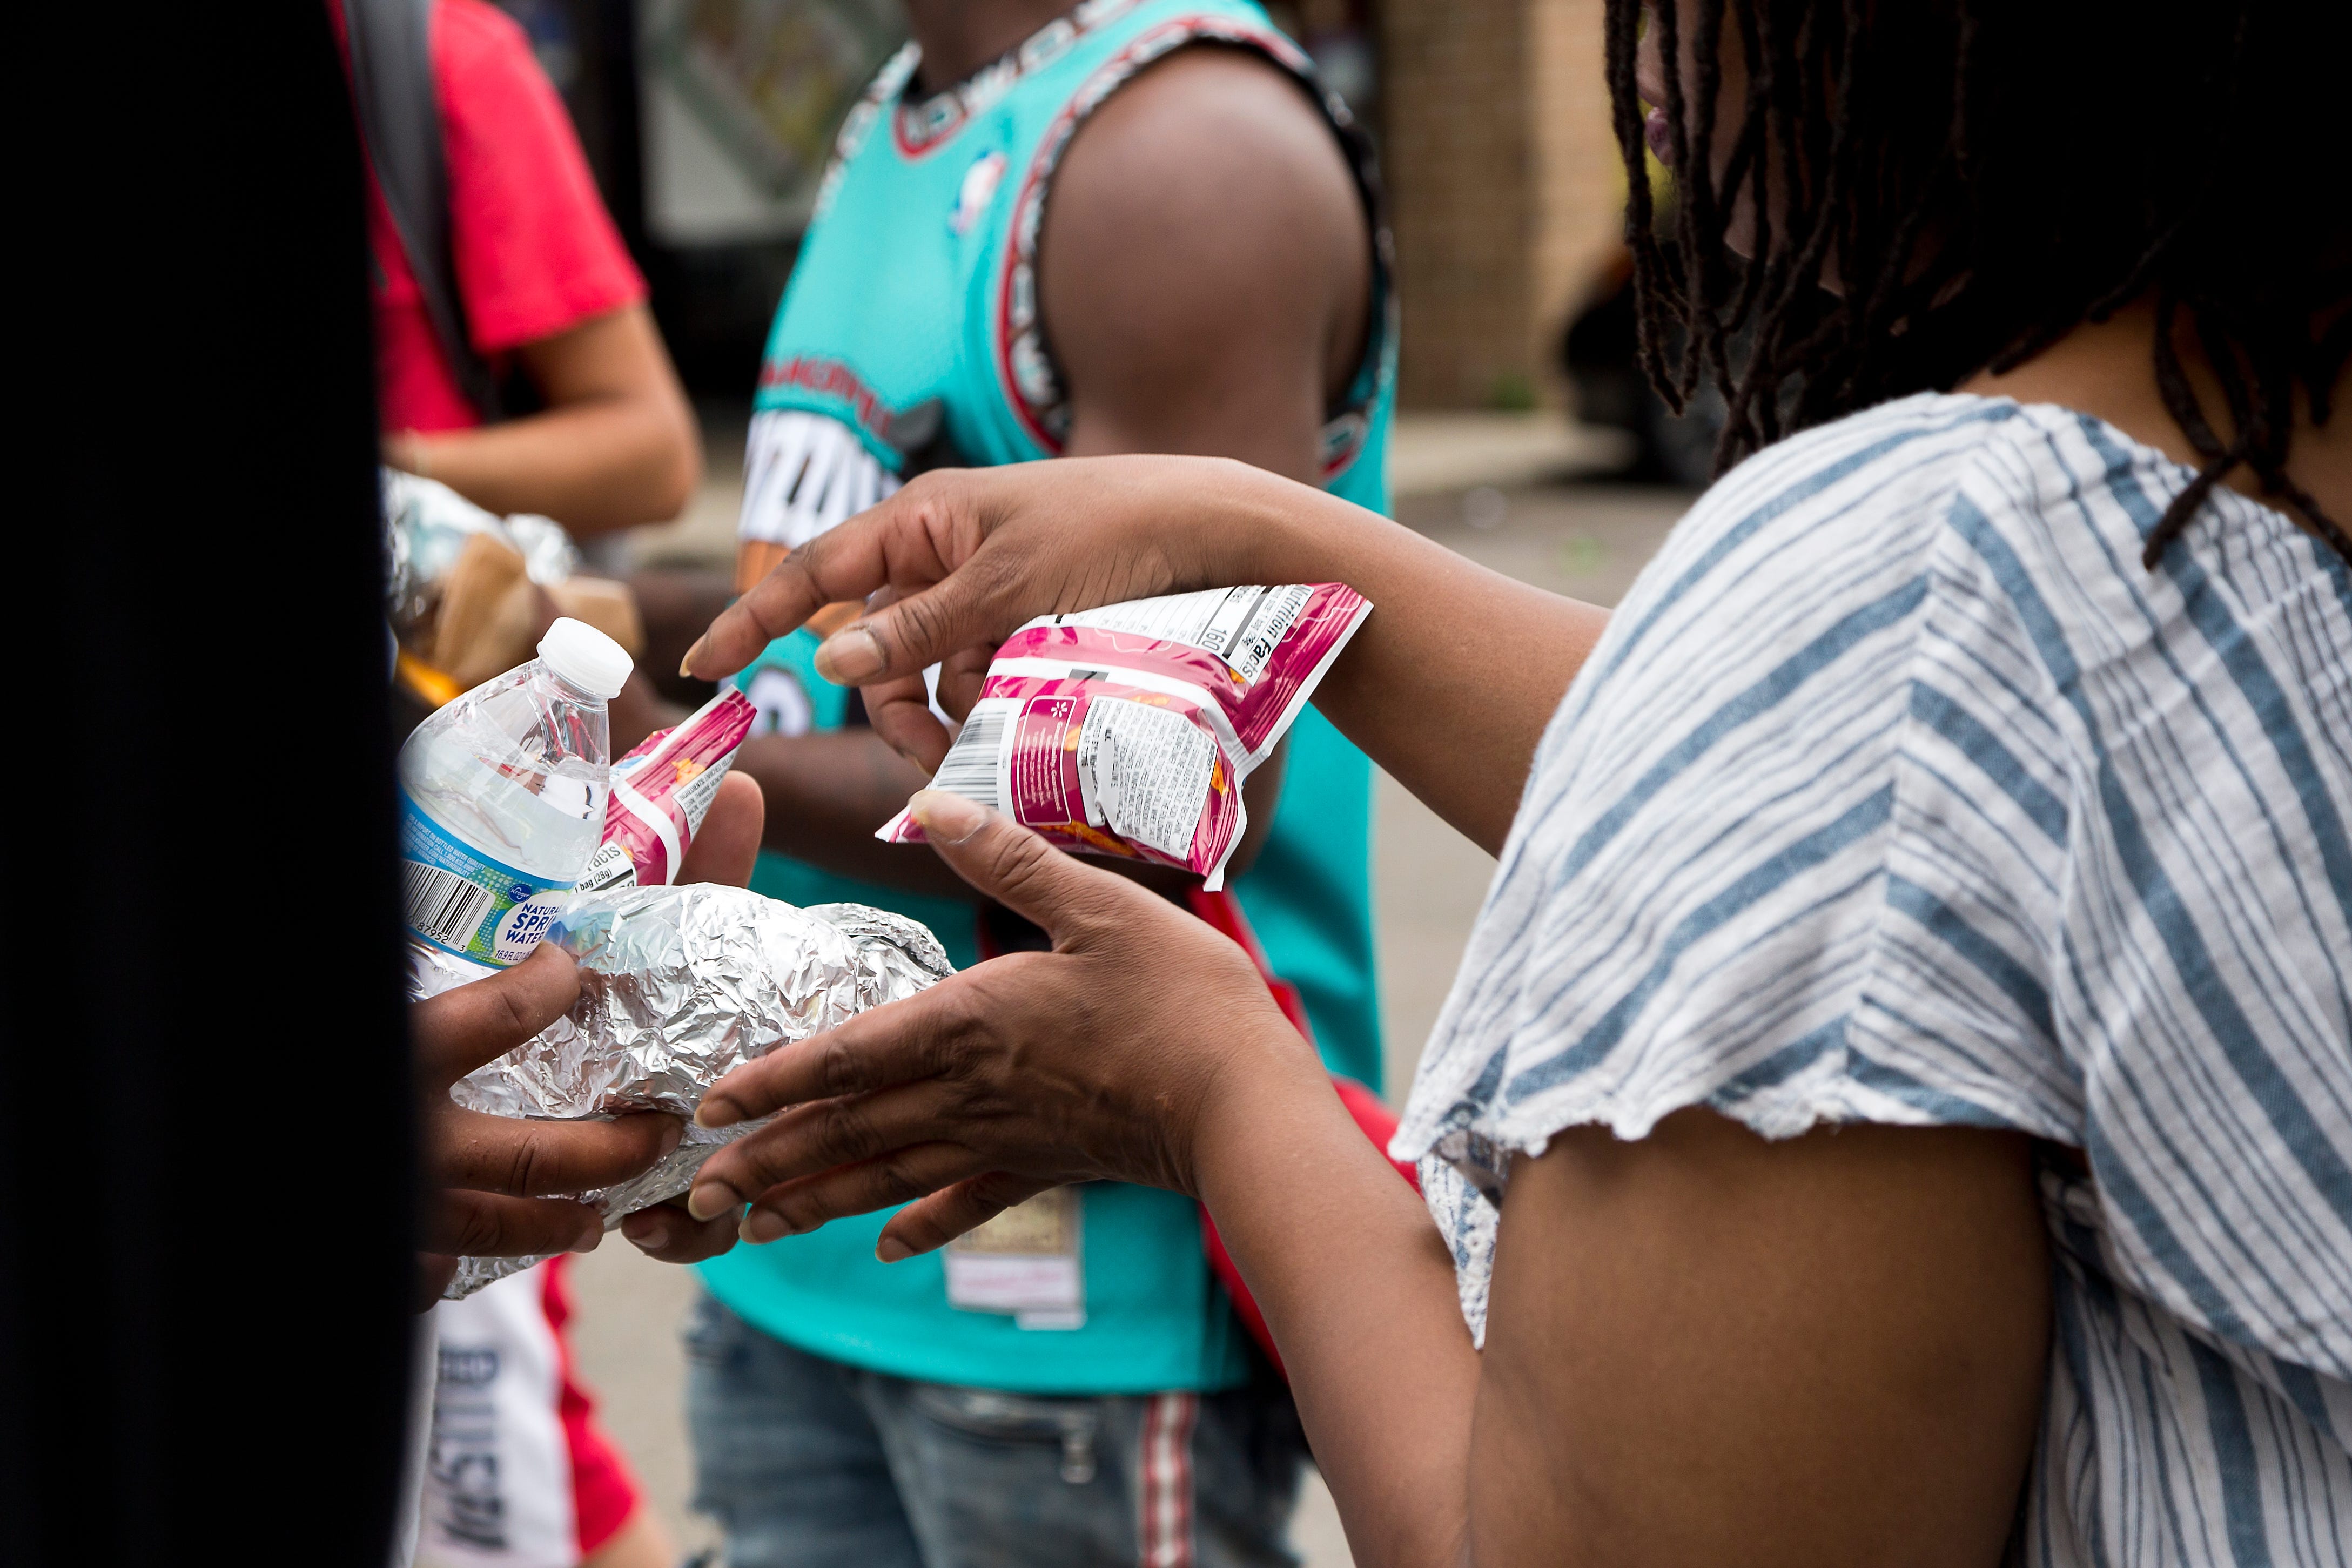 Everyday Hero finalist Debra McCauley hands out food to members of Columbus's homeless population on Thursday, July 1, 2021.